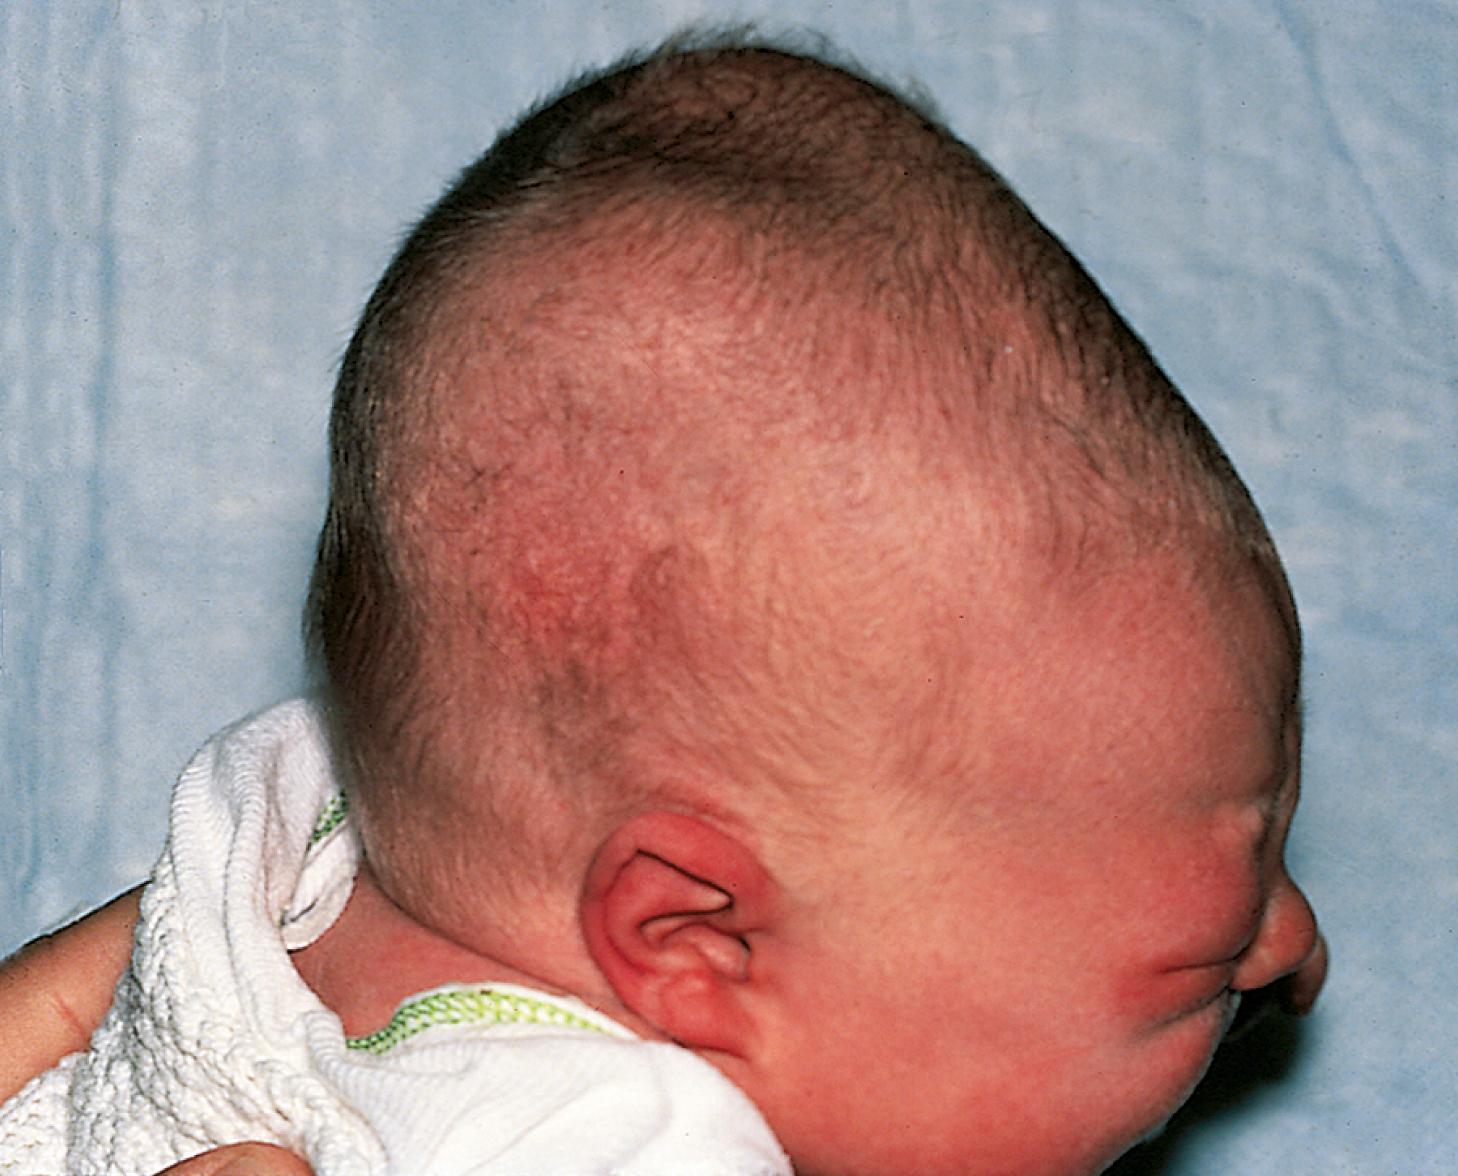 Fig. 2.23, Cephalohematoma. In this infant with bilateral cephalohematomas, the midline sagittal suture remained palpable, confirming the subperiosteal location of the hematomas.